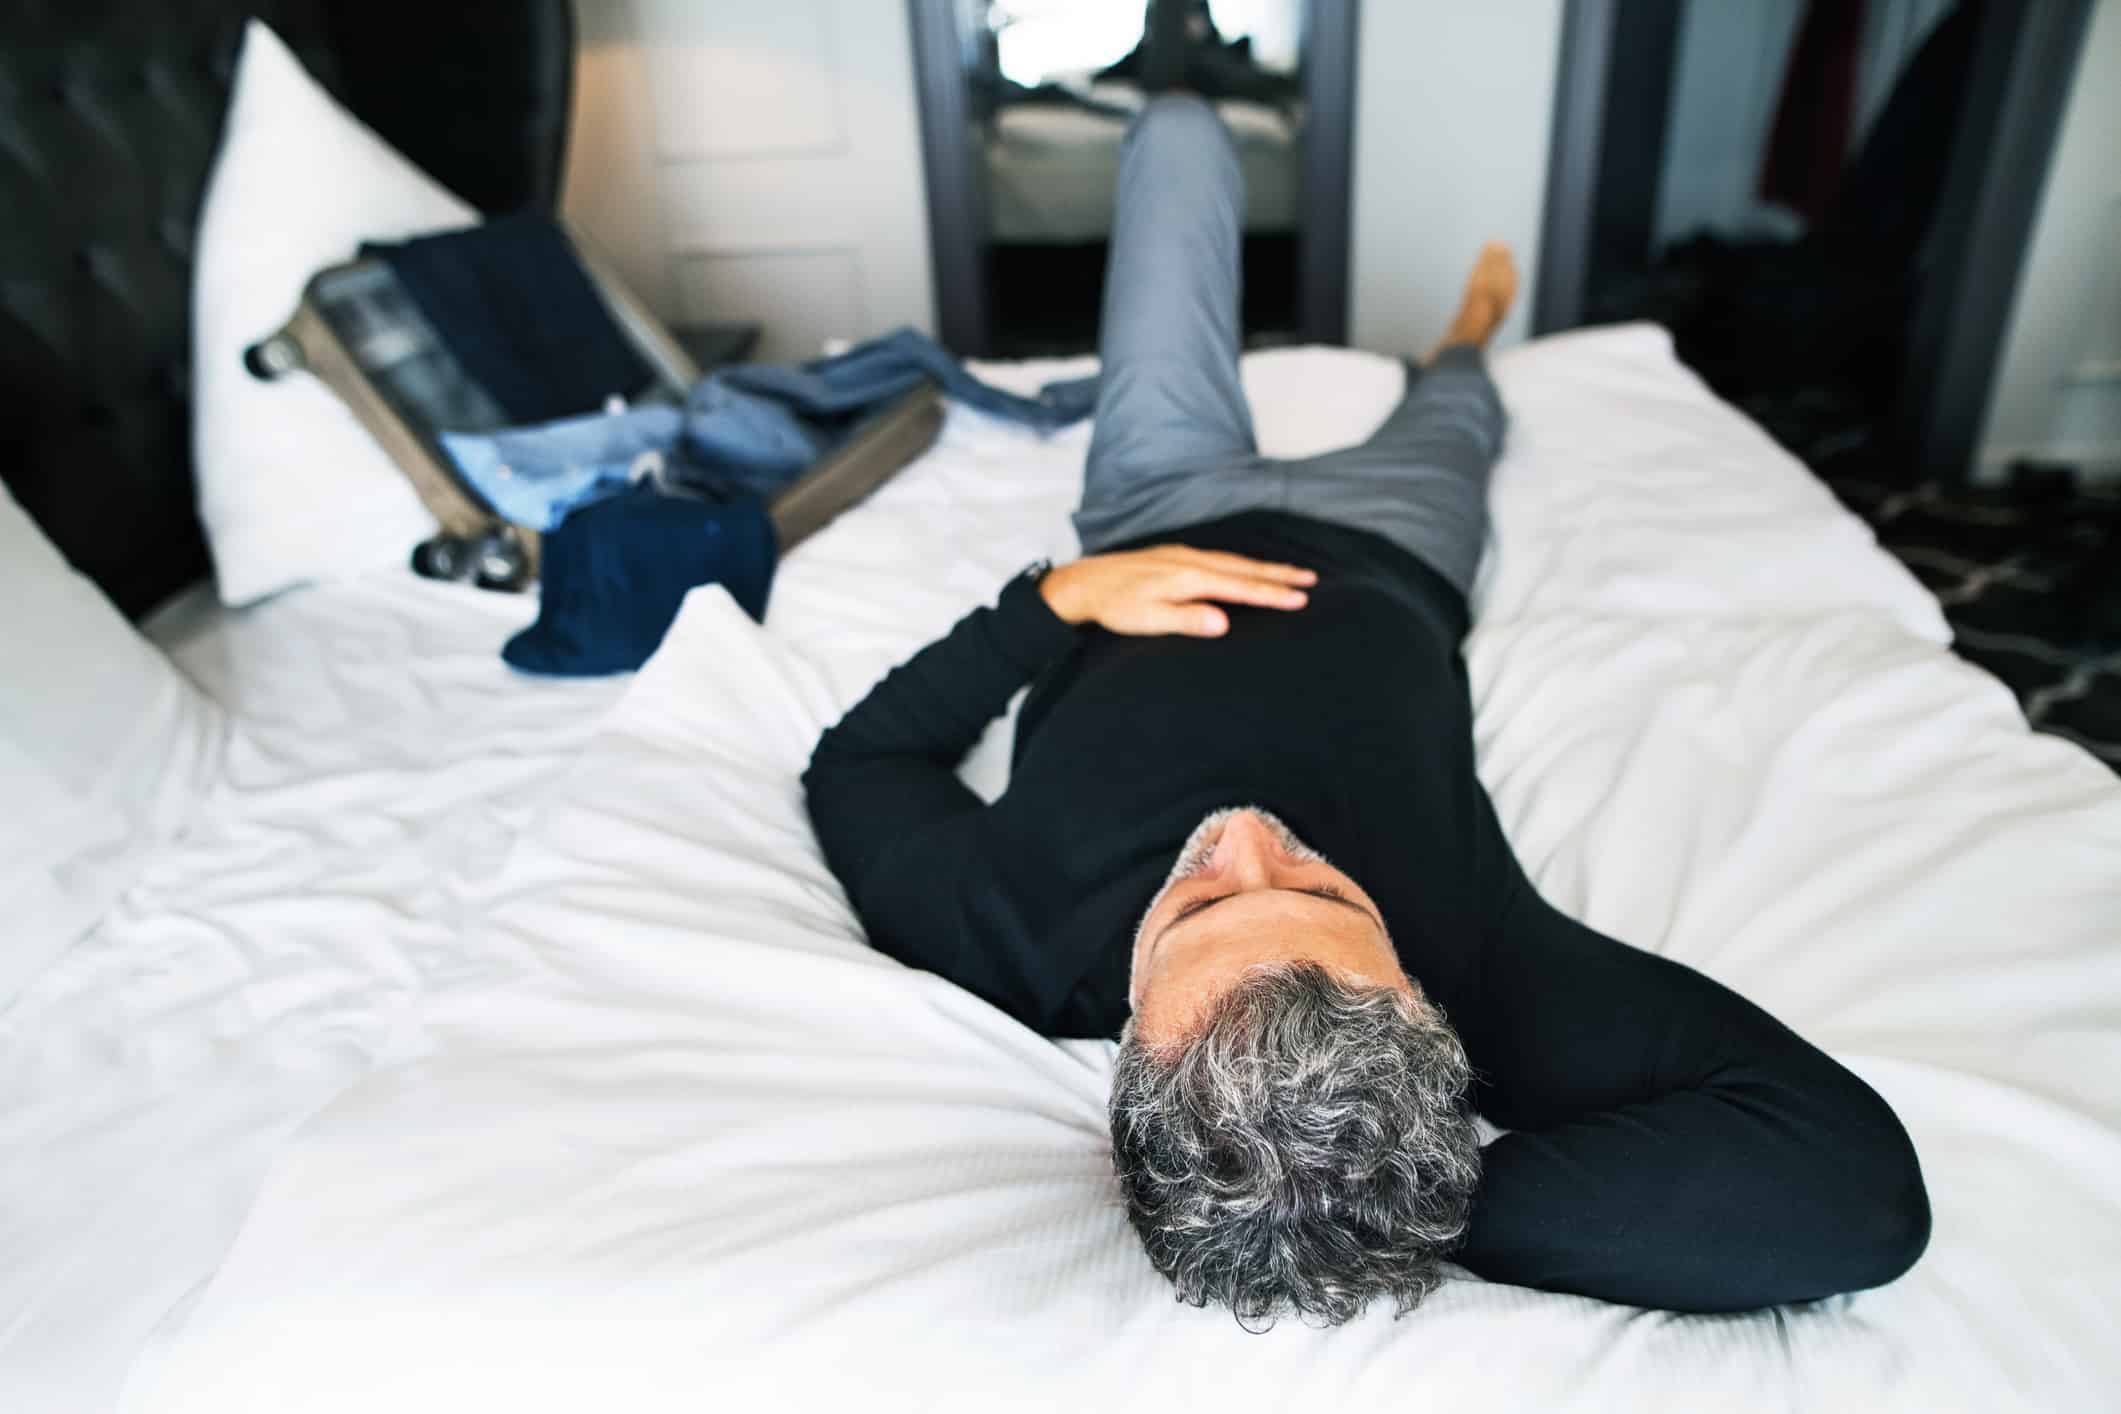 Mature businessman in a hotel room. man lying on a bed, resting. Image credit: Halfpoint